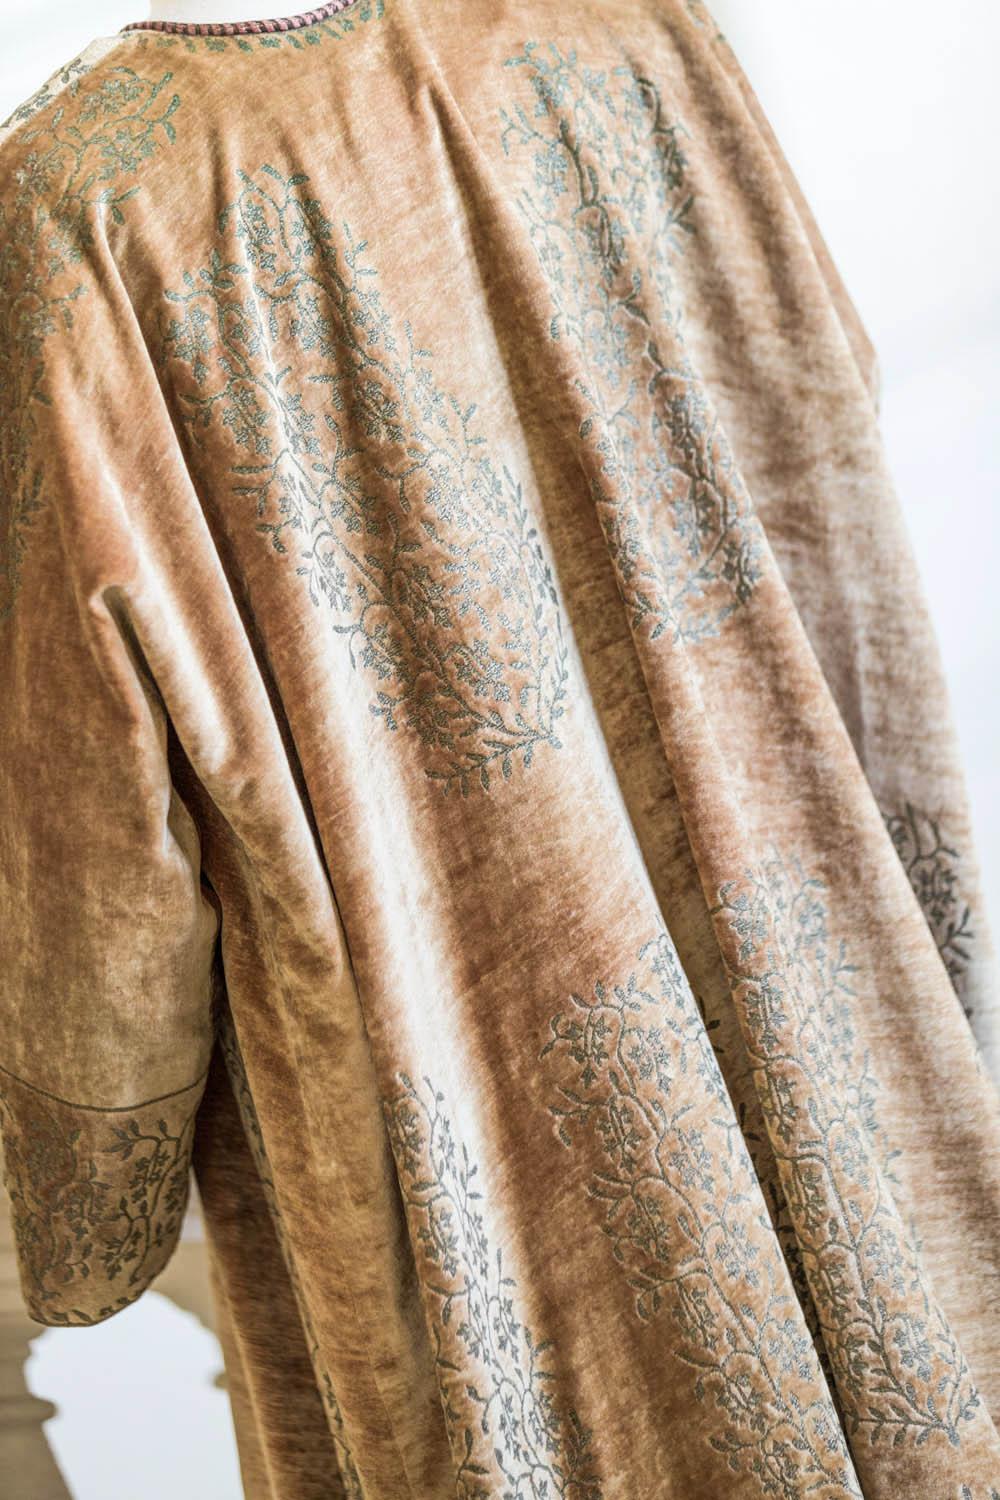 1915/1925
Venise Italy
A short kaftan coat with kimono sleeves in mandarin silk velvet. Gold printing of large cartridges with stylized floral decoration. Beige satin silk lining. Collar tied with a bicolor braid ended by two white Murano glass